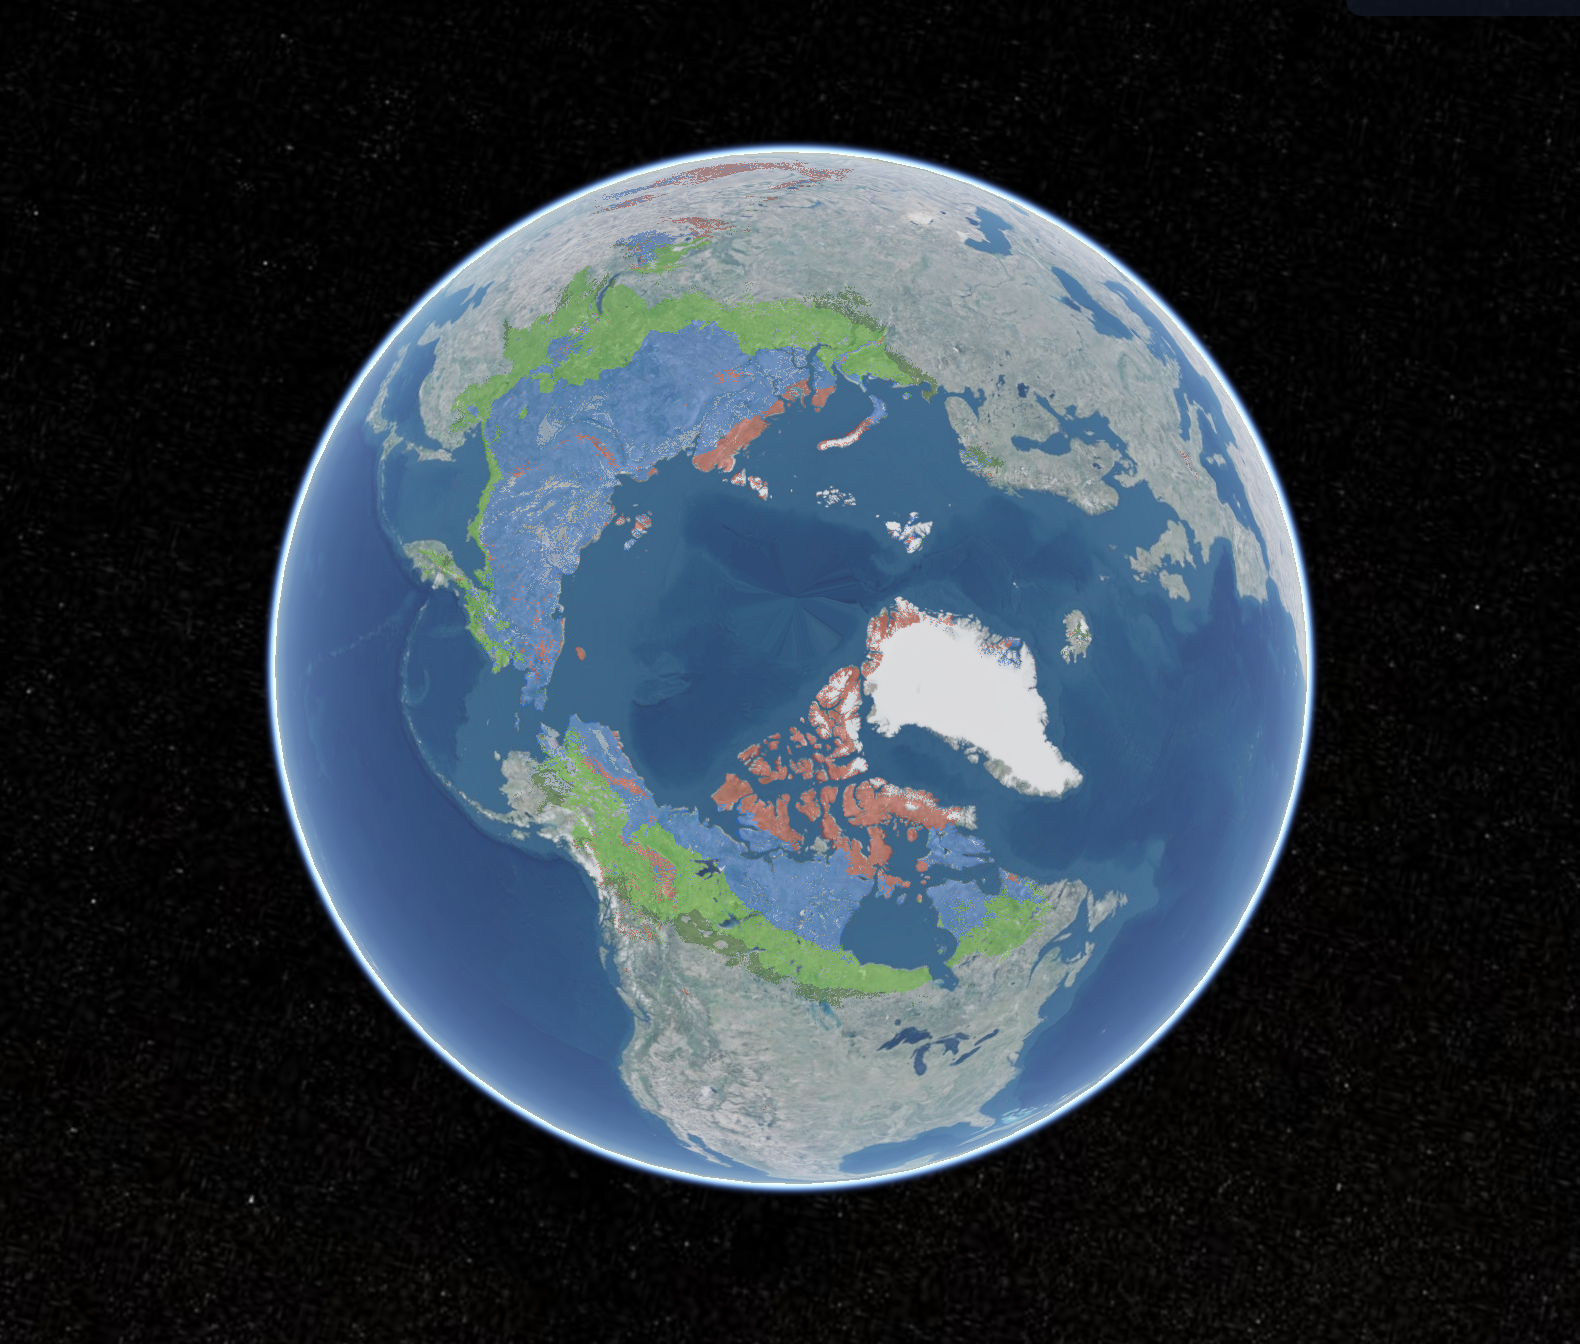 Image of a Earth with areas of green, blue and red which illustrate permafrost zones across the Arctic